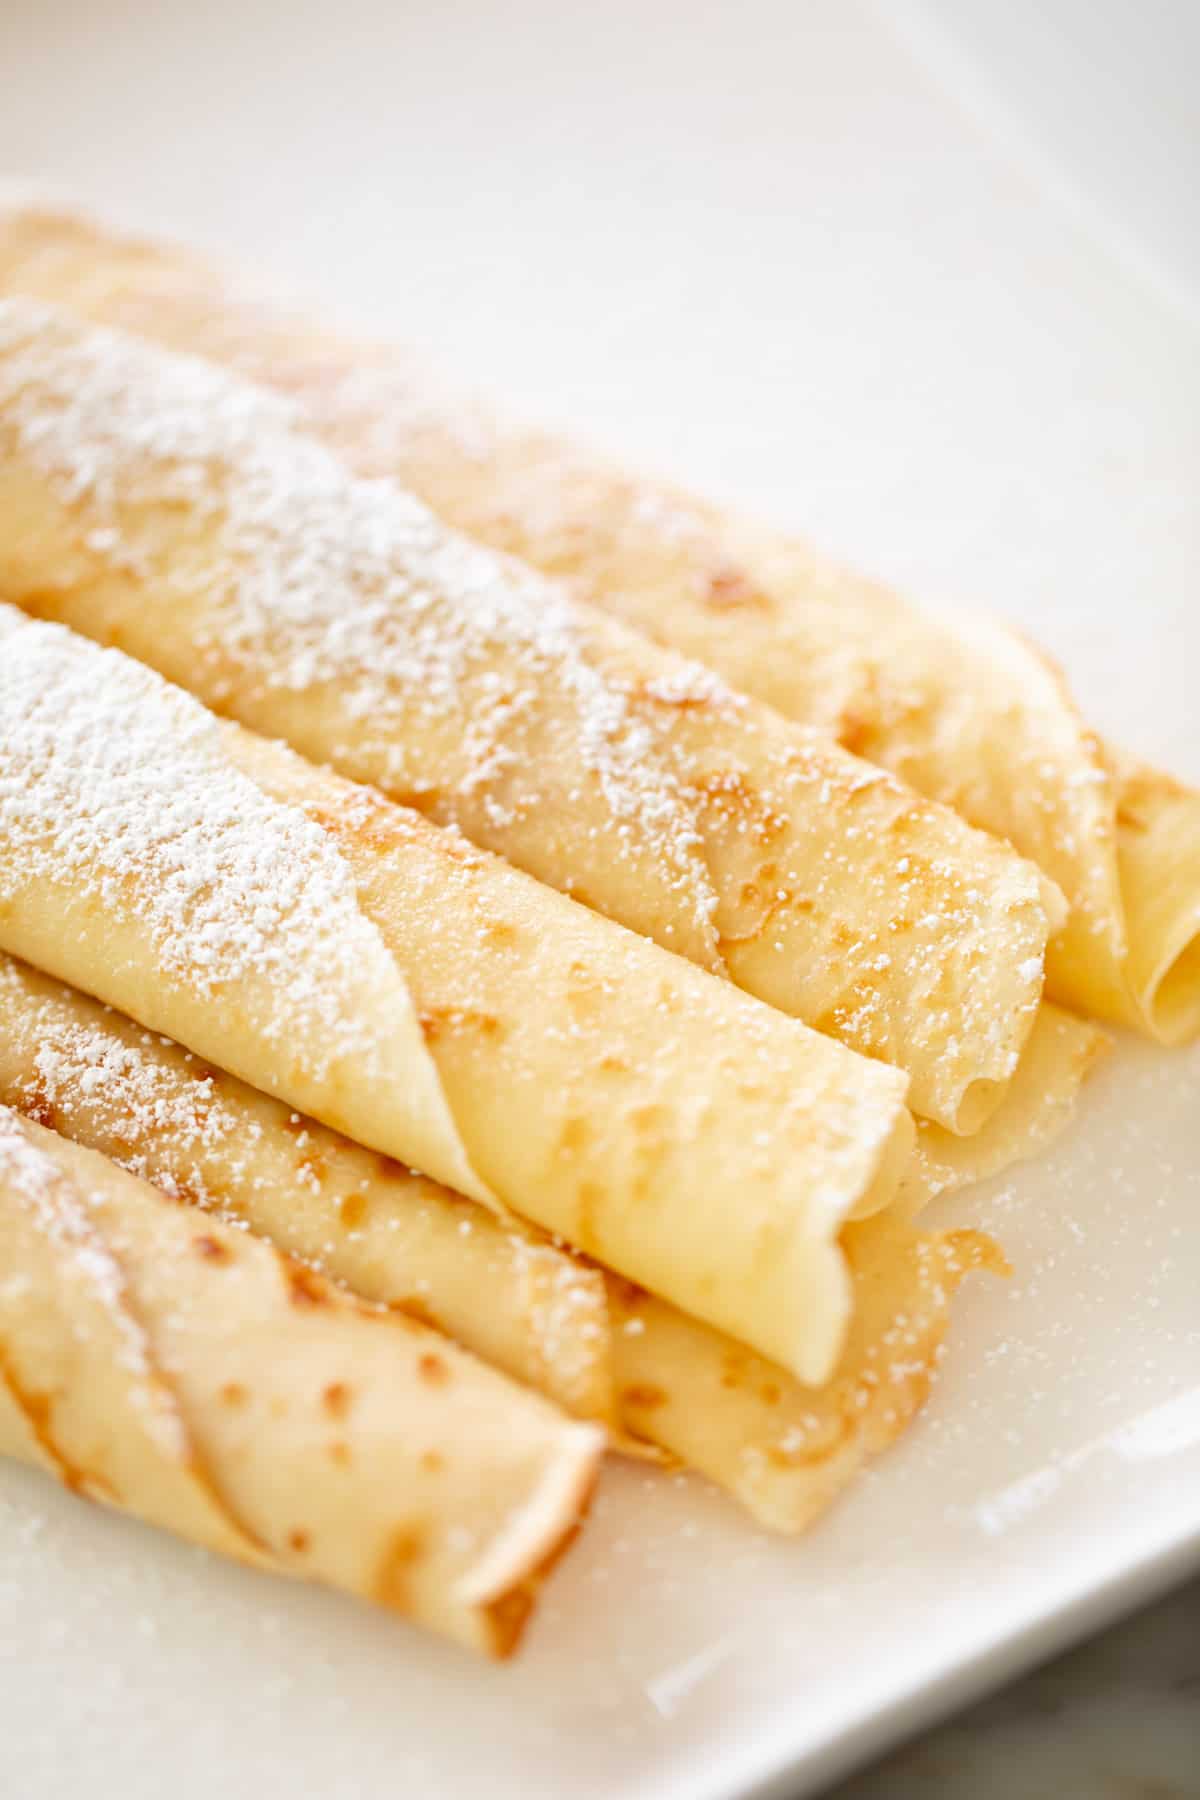 Rolled up crepes on a plate with confectioners sugar | cafedelites.com